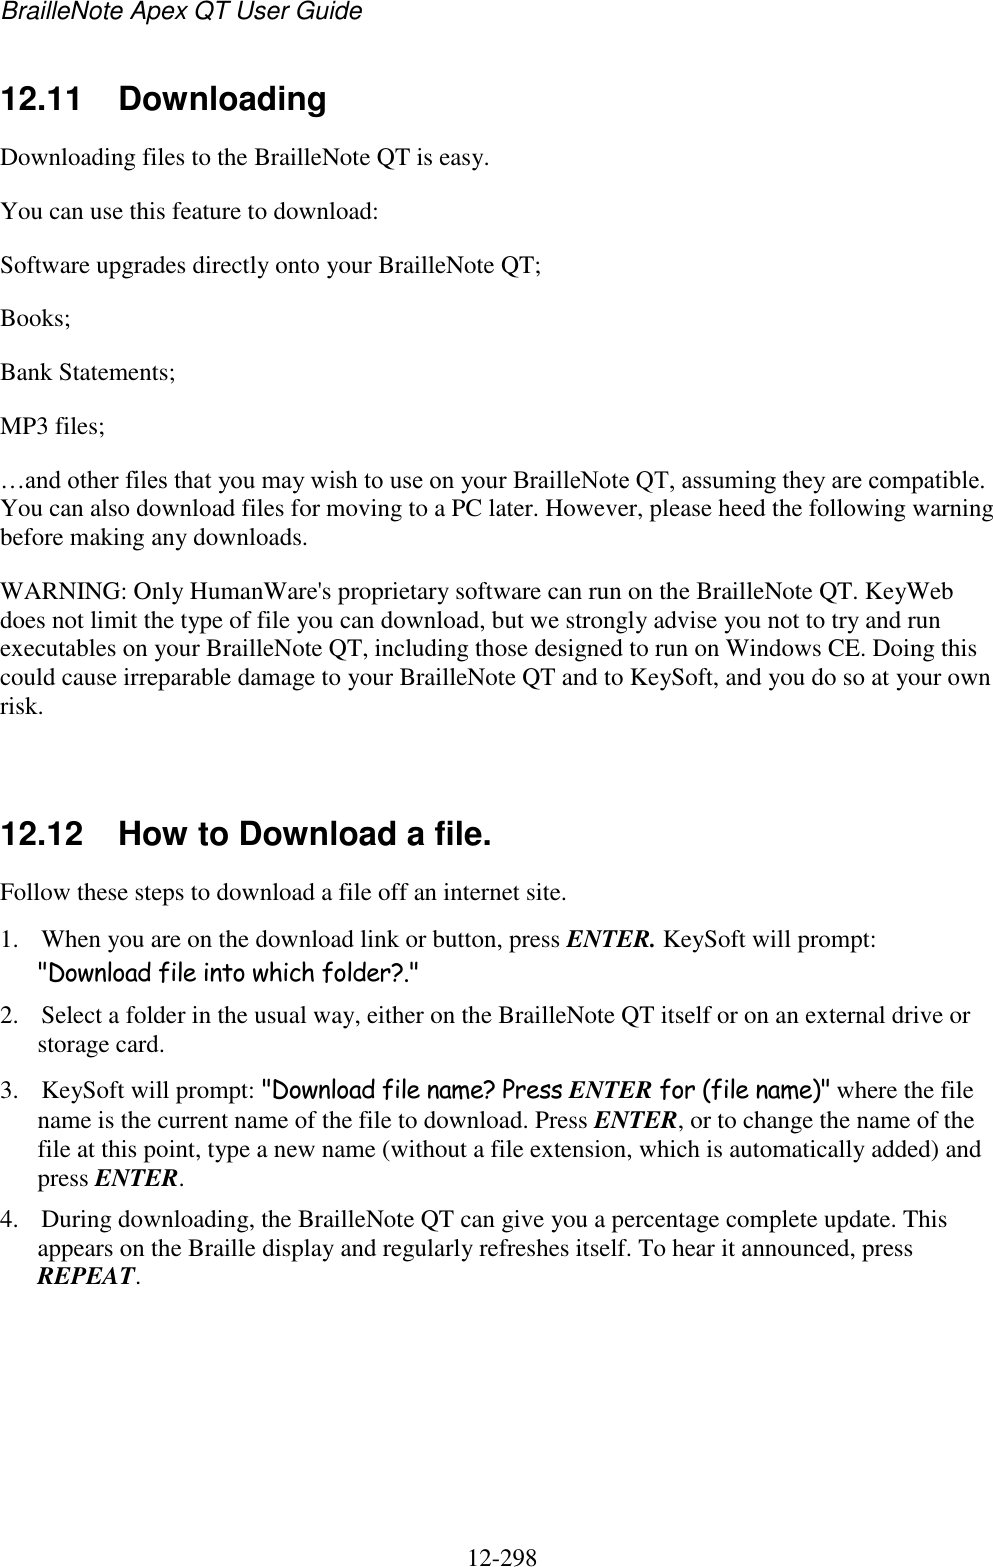 BrailleNote Apex QT User Guide  12-298   12.11  Downloading Downloading files to the BrailleNote QT is easy. You can use this feature to download: Software upgrades directly onto your BrailleNote QT; Books; Bank Statements; MP3 files; …and other files that you may wish to use on your BrailleNote QT, assuming they are compatible. You can also download files for moving to a PC later. However, please heed the following warning before making any downloads. WARNING: Only HumanWare&apos;s proprietary software can run on the BrailleNote QT. KeyWeb does not limit the type of file you can download, but we strongly advise you not to try and run executables on your BrailleNote QT, including those designed to run on Windows CE. Doing this could cause irreparable damage to your BrailleNote QT and to KeySoft, and you do so at your own risk.   12.12  How to Download a file. Follow these steps to download a file off an internet site. 1. When you are on the download link or button, press ENTER. KeySoft will prompt: &quot;Download file into which folder?.&quot; 2. Select a folder in the usual way, either on the BrailleNote QT itself or on an external drive or storage card. 3. KeySoft will prompt: &quot;Download file name? Press ENTER for (file name)&quot; where the file name is the current name of the file to download. Press ENTER, or to change the name of the file at this point, type a new name (without a file extension, which is automatically added) and press ENTER. 4. During downloading, the BrailleNote QT can give you a percentage complete update. This appears on the Braille display and regularly refreshes itself. To hear it announced, press REPEAT. 